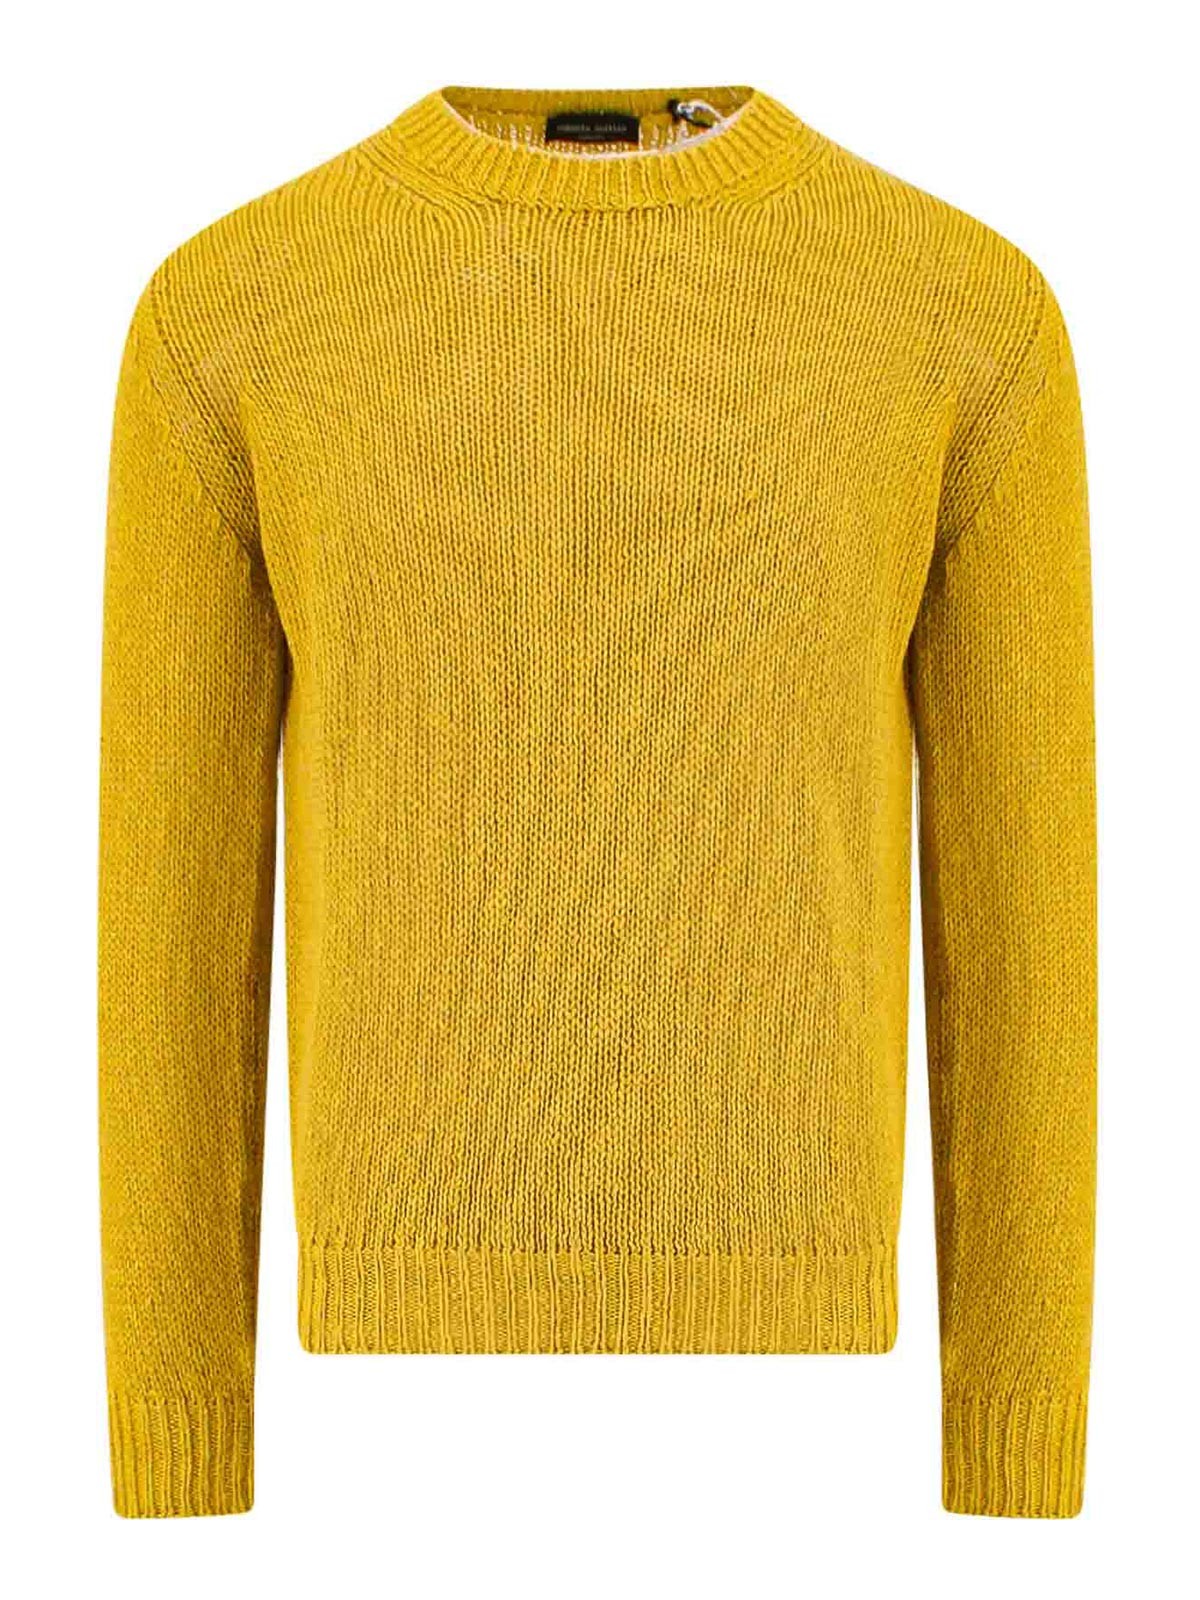 Roberto Collina Cotton And Linen Sweater In Yellow